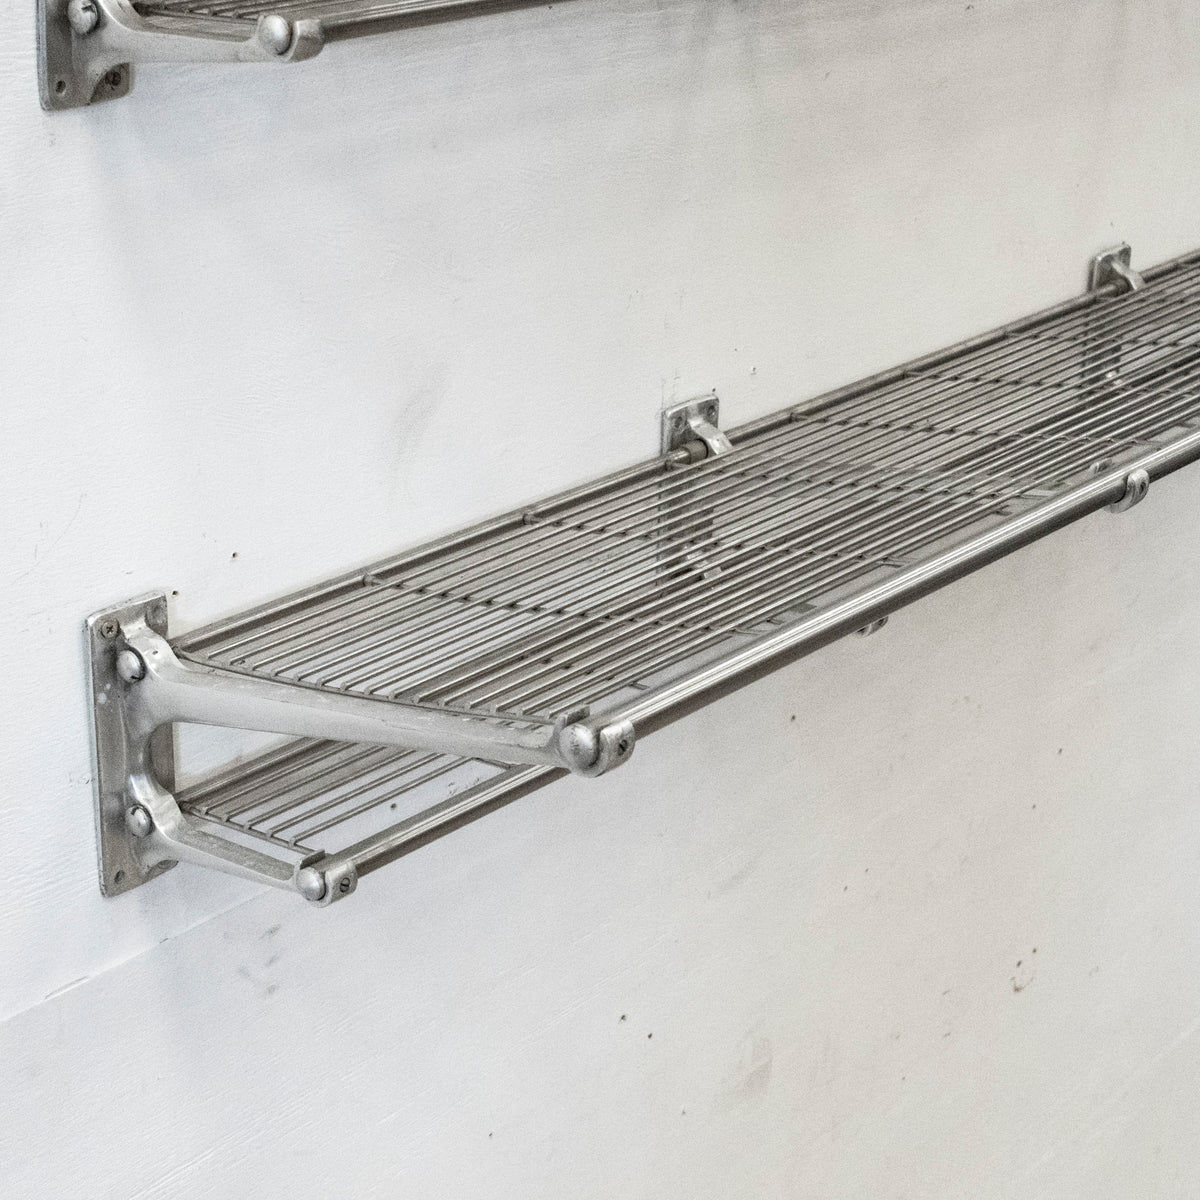 Reclaimed Mid-Century Train Luggage Racks | The Architectural Forum